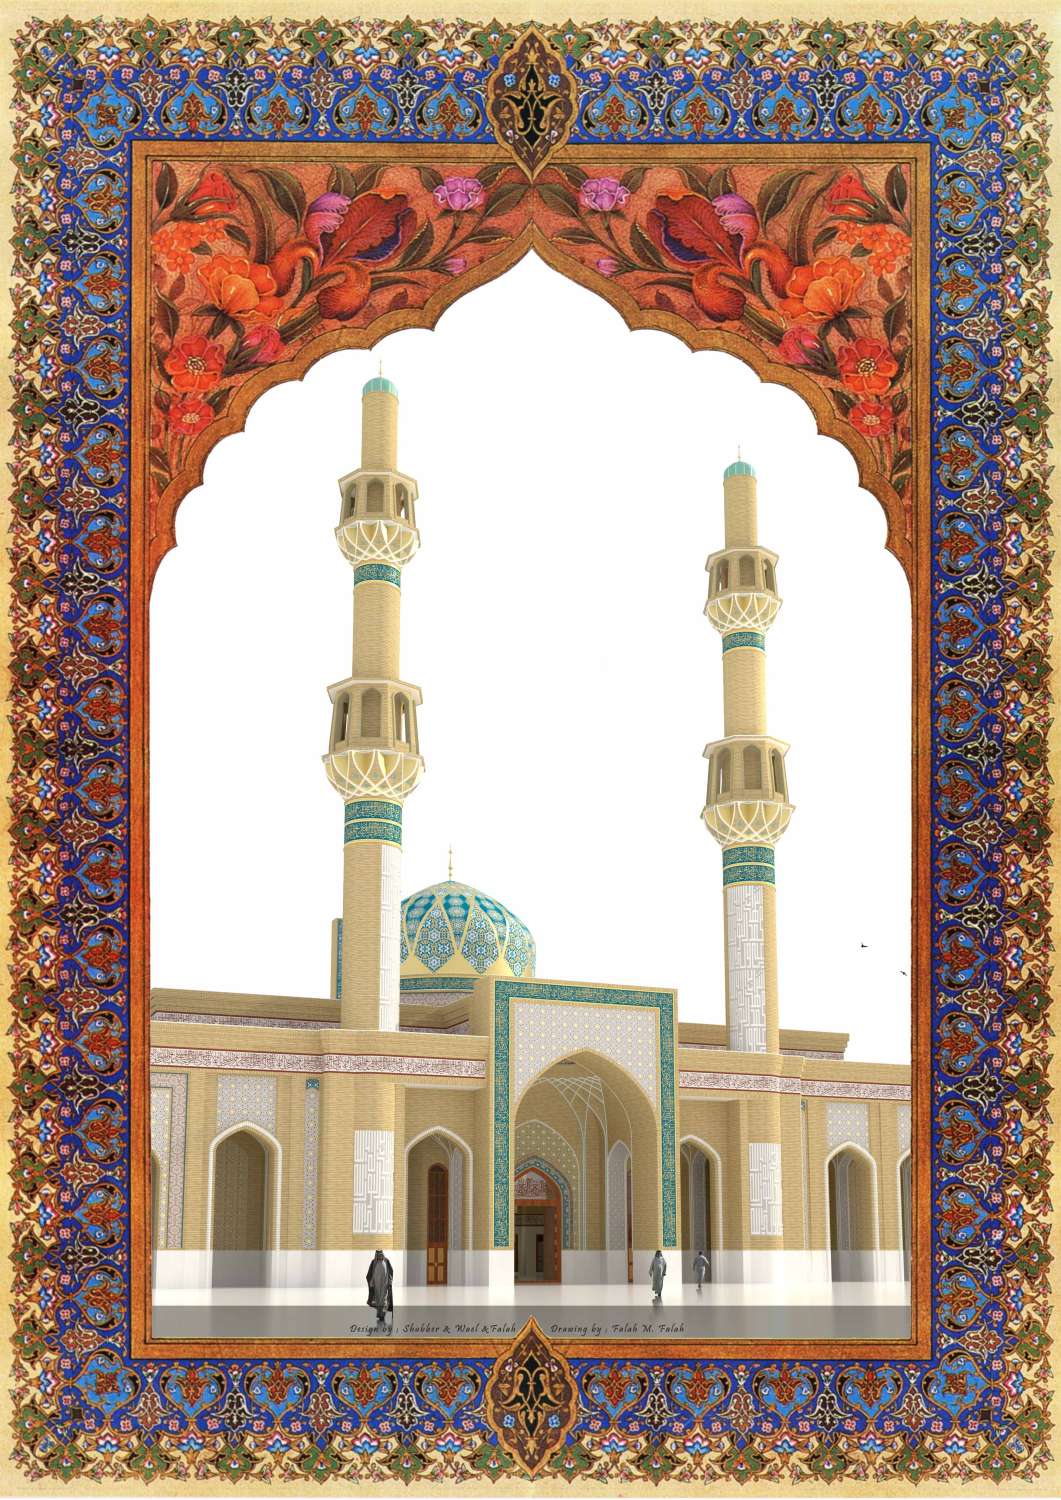 Design of new mosque: rendering of new mosque facade within decorative frame.